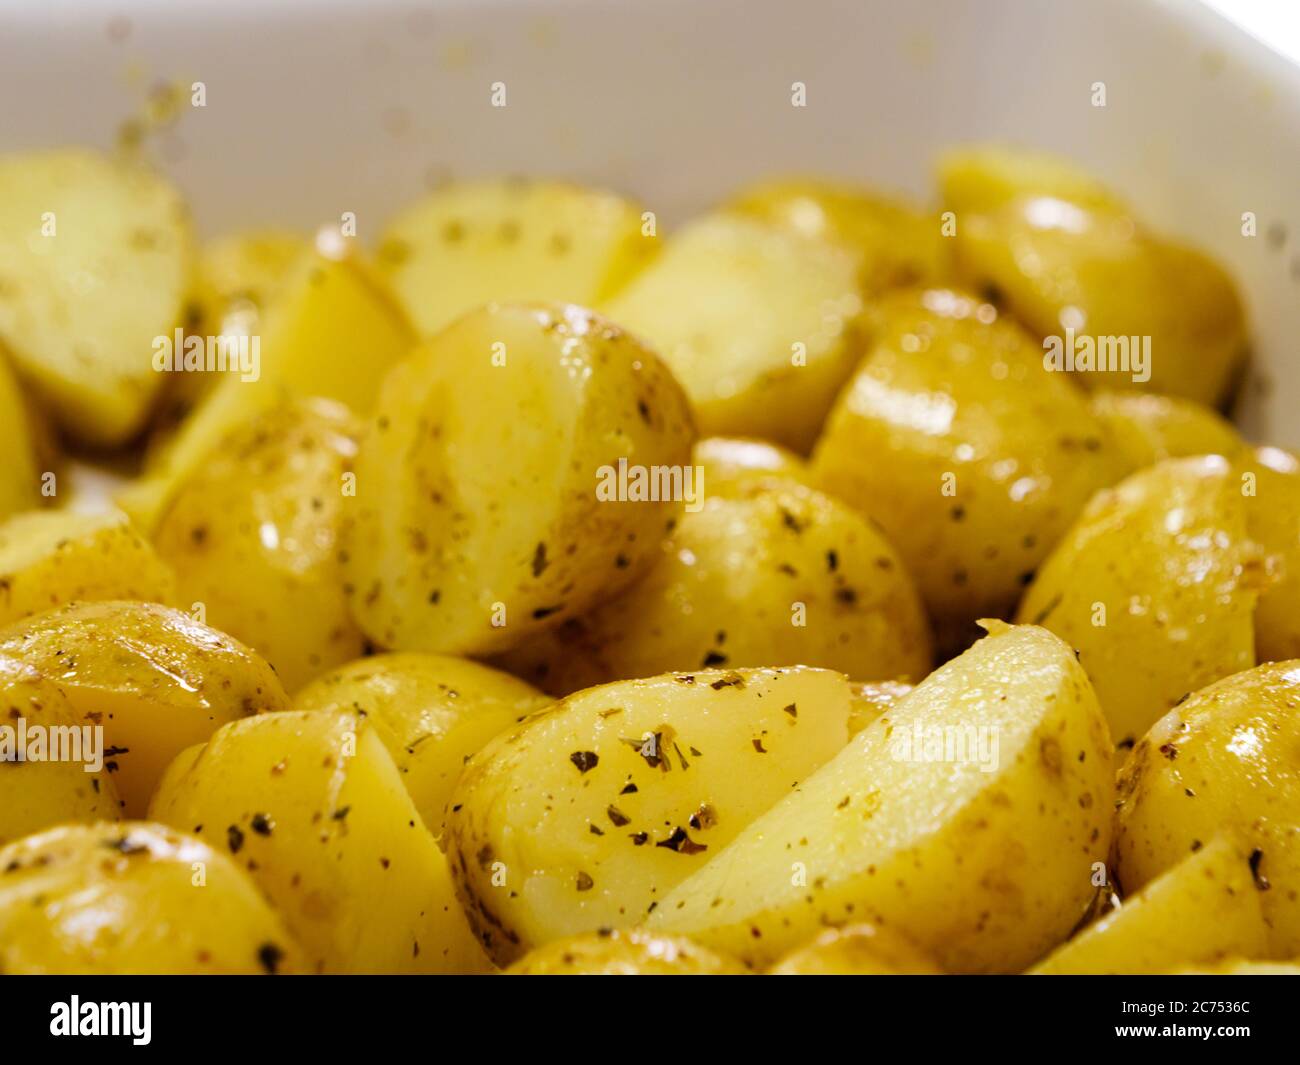 Macro close-up of sliced potatoes seasoned with herbs and olive oil prior to being put in the oven Stock Photo